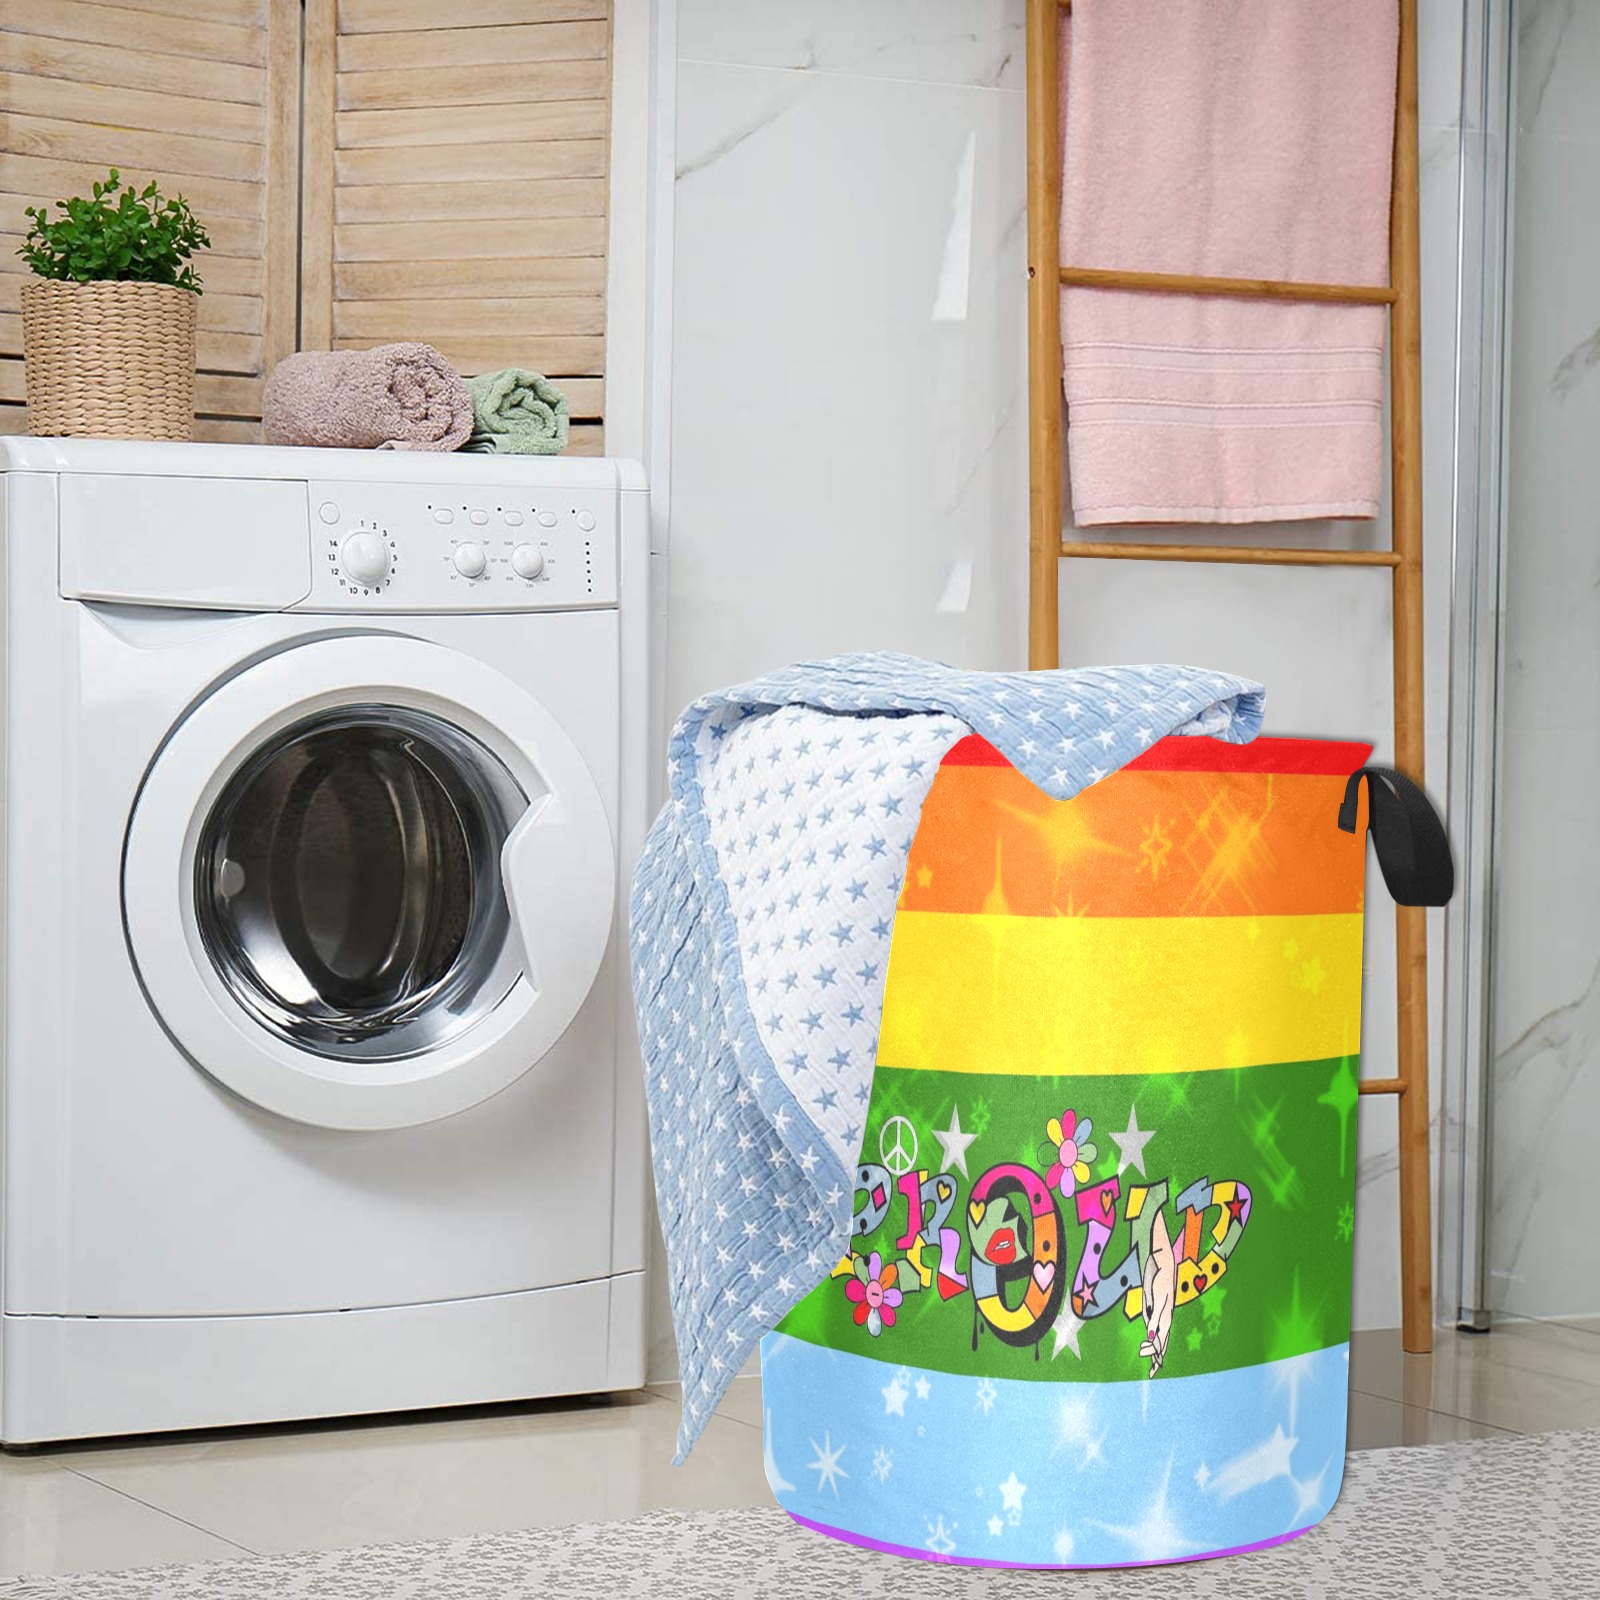 Proud by Nico Bielow Laundry Bag (Large)